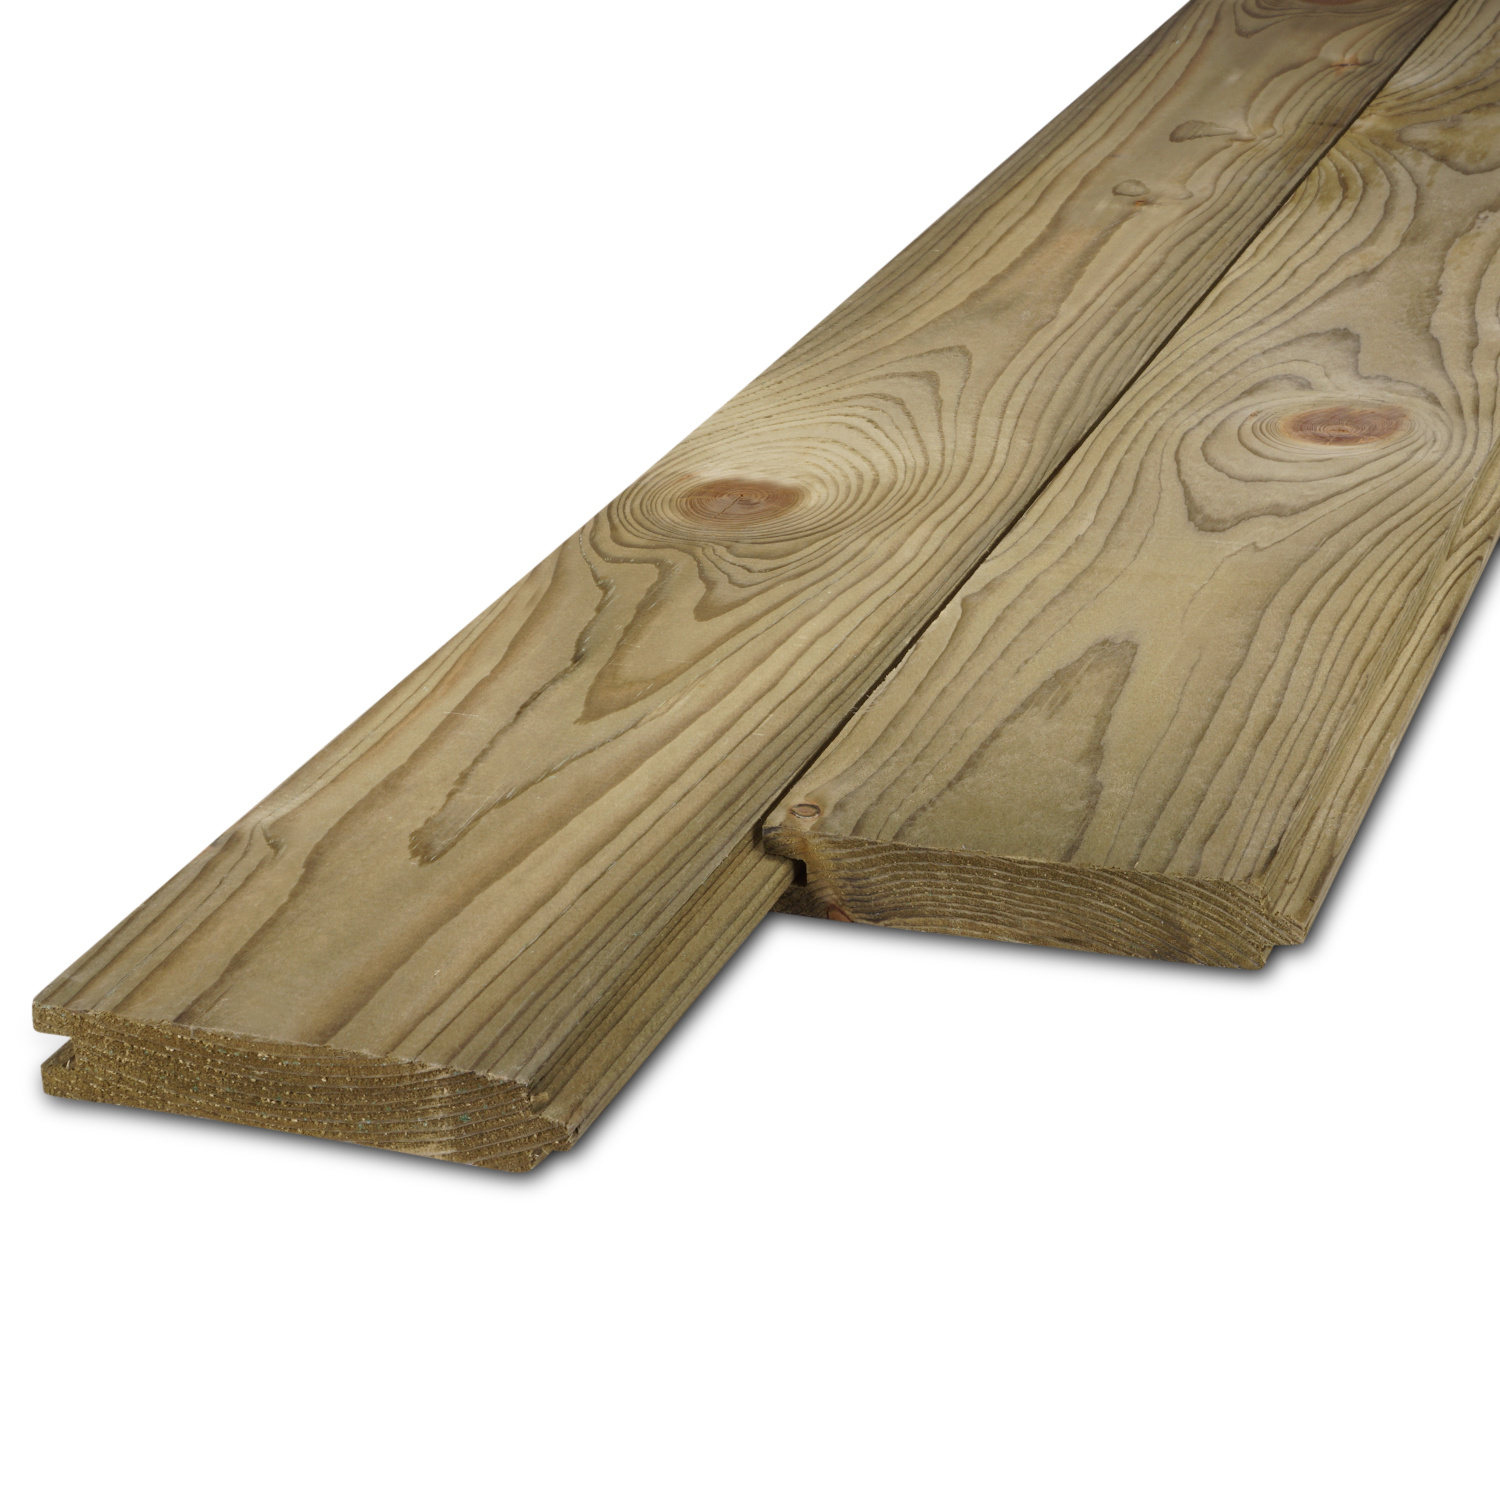 PLANK TAND/GROEF 28MM X 130MM - 200 CM